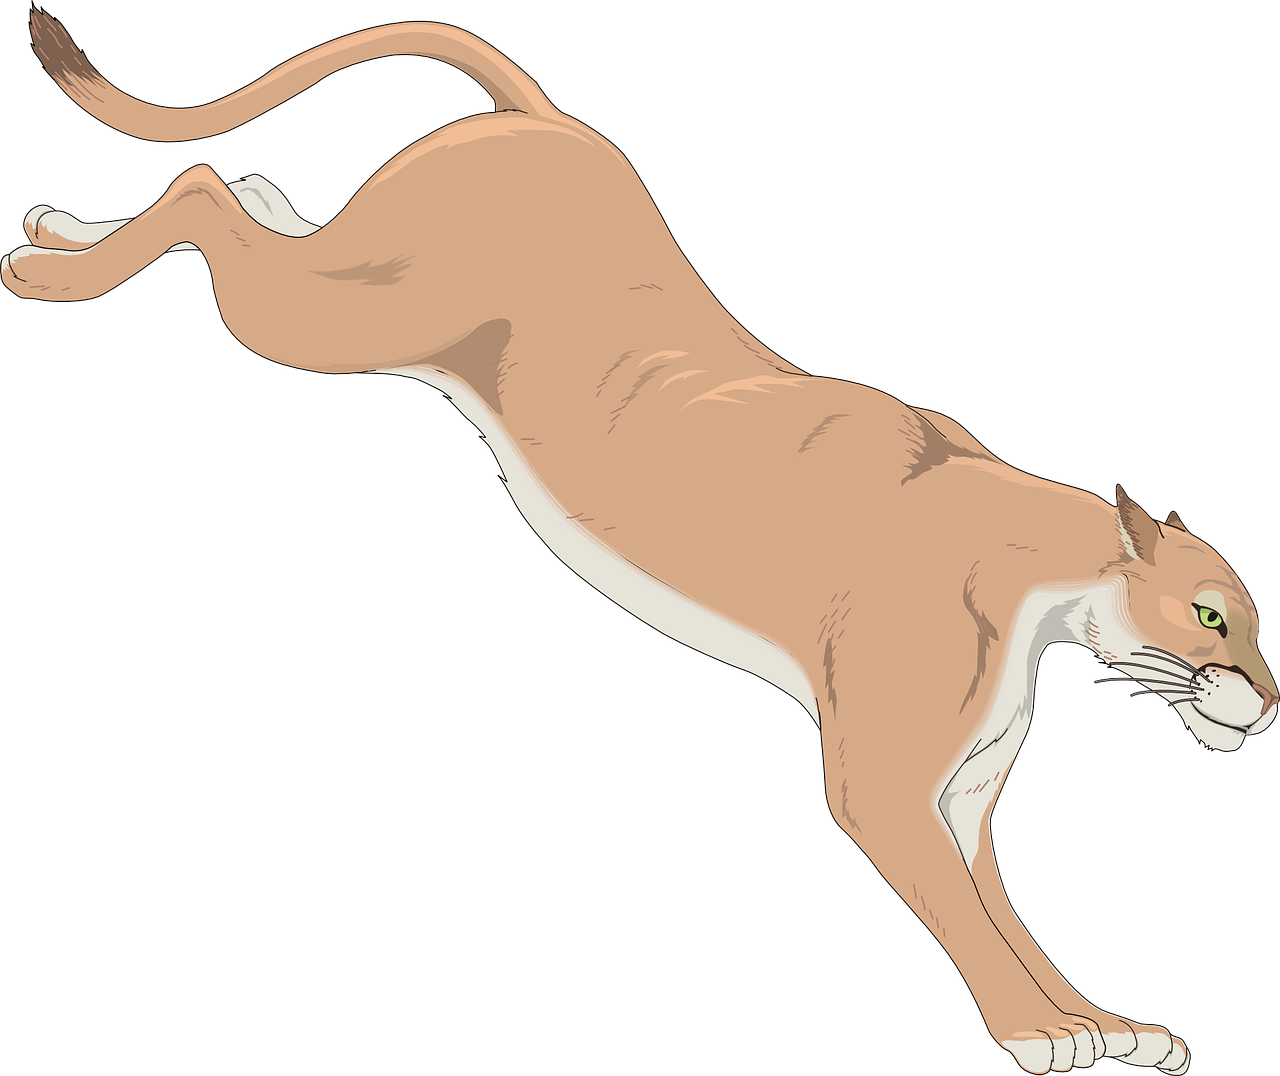 cougar,mountain,lion,dangerous,animal,tail,mammal,danger,free vector graphics,free pictures, free photos, free images, royalty free, free illustrations, public domain